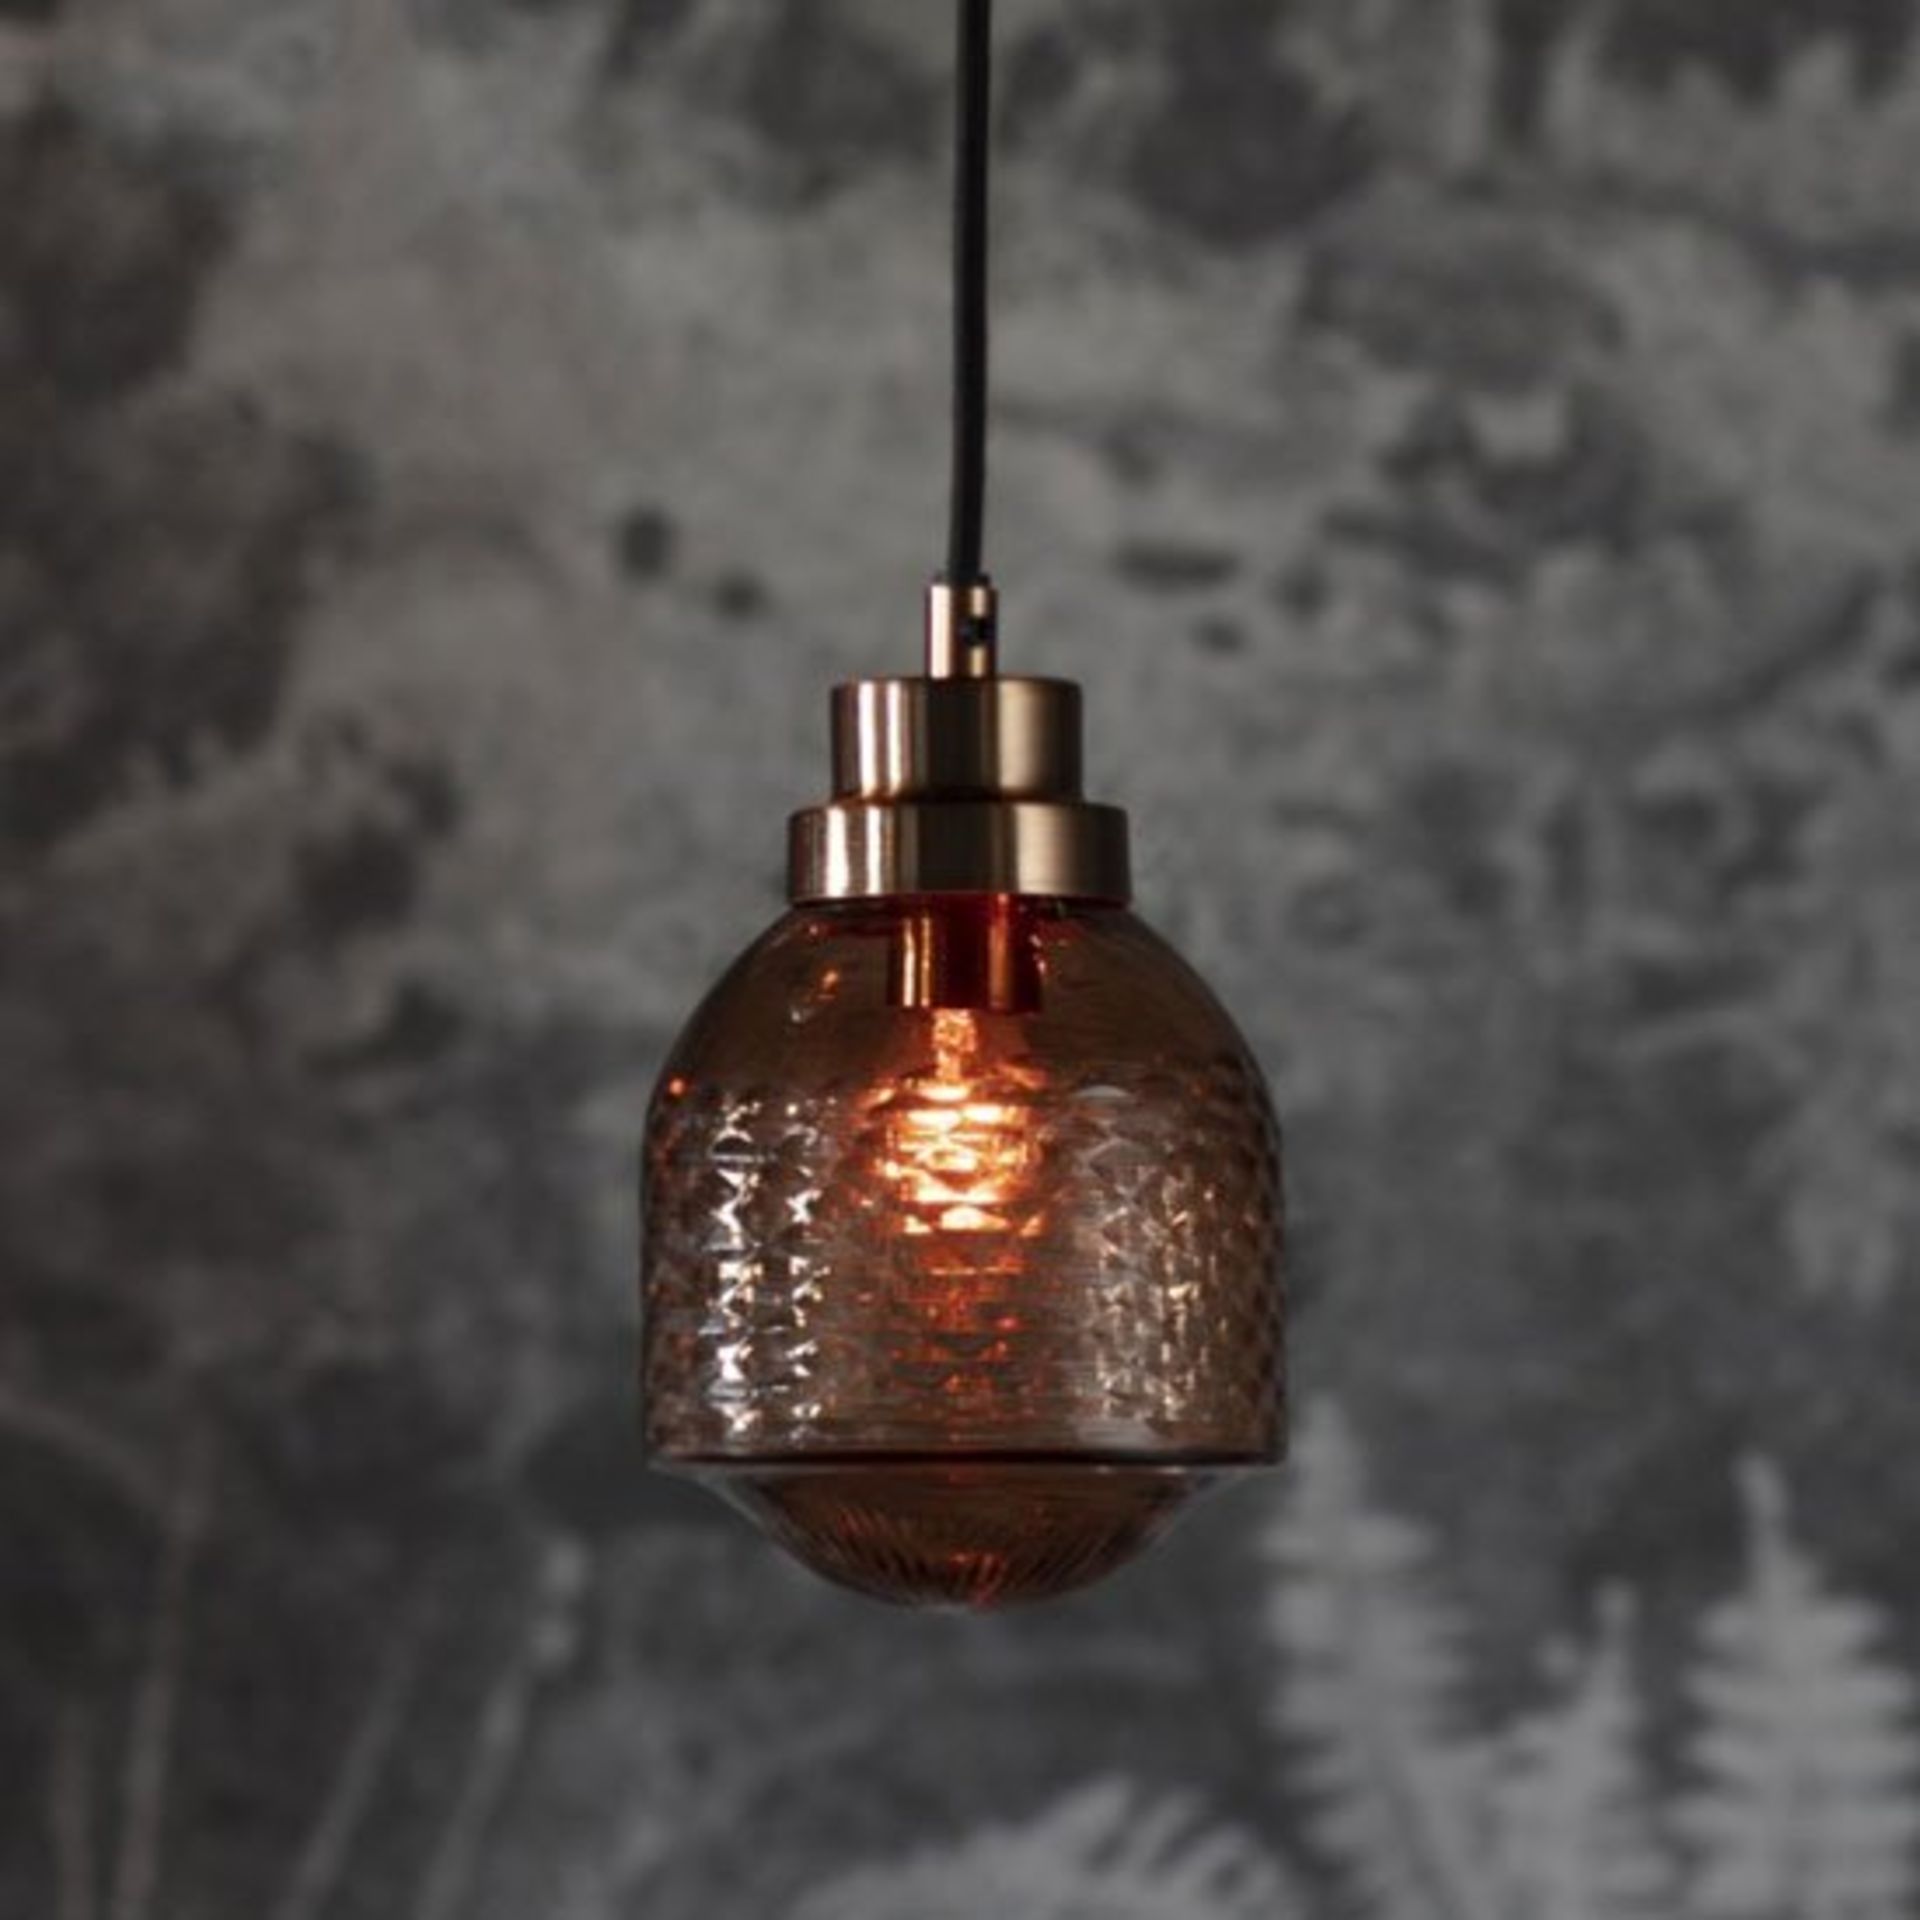 Thorson Pendant Light Modern pendant light featuring metal fixtures and a tinted and textured